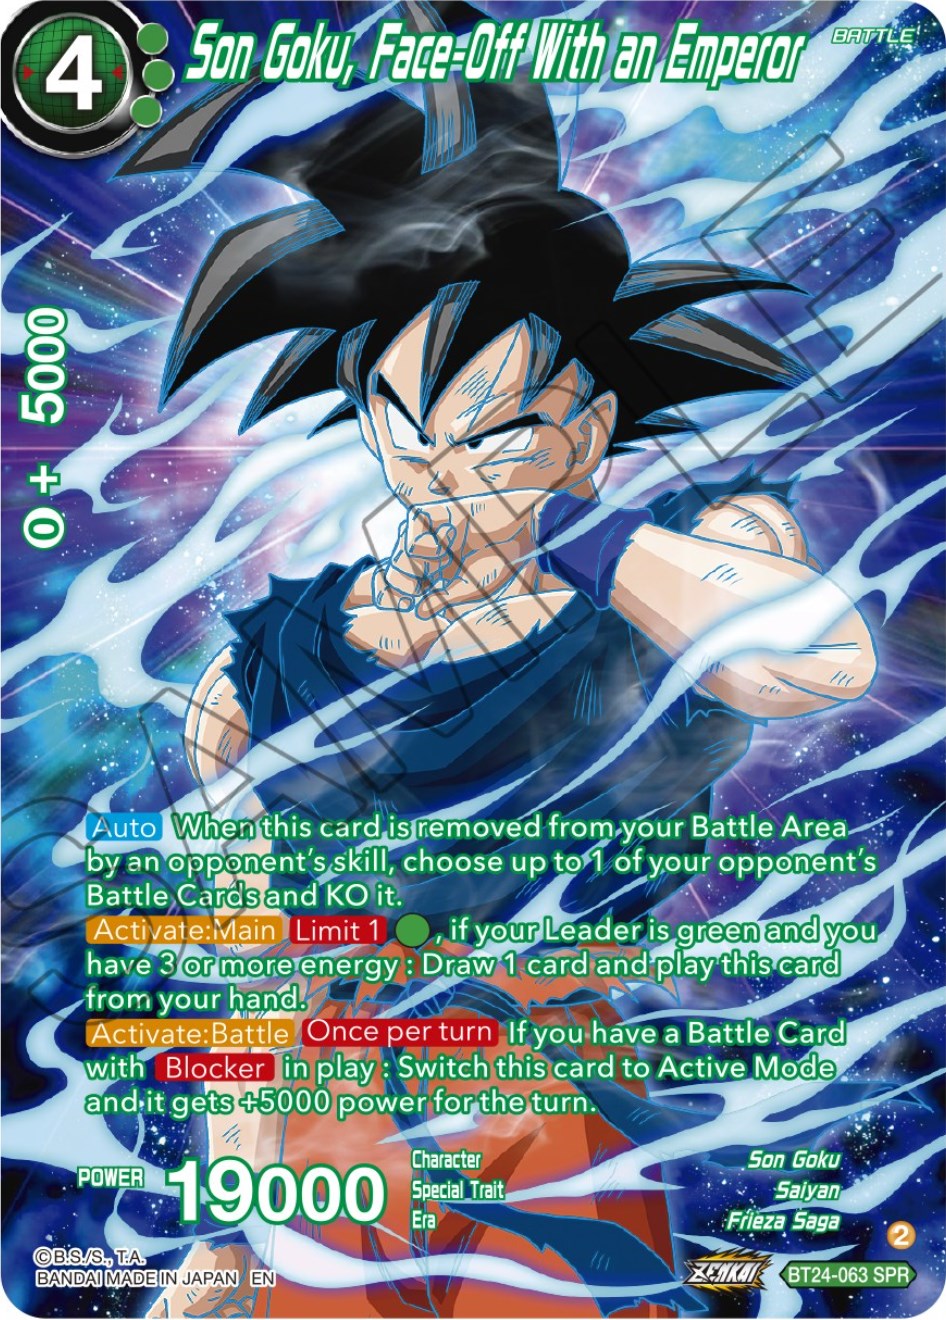 Son Goku, Face-Off With an Emperor (SPR) (BT24-063) [Beyond Generations] | Amazing Games TCG